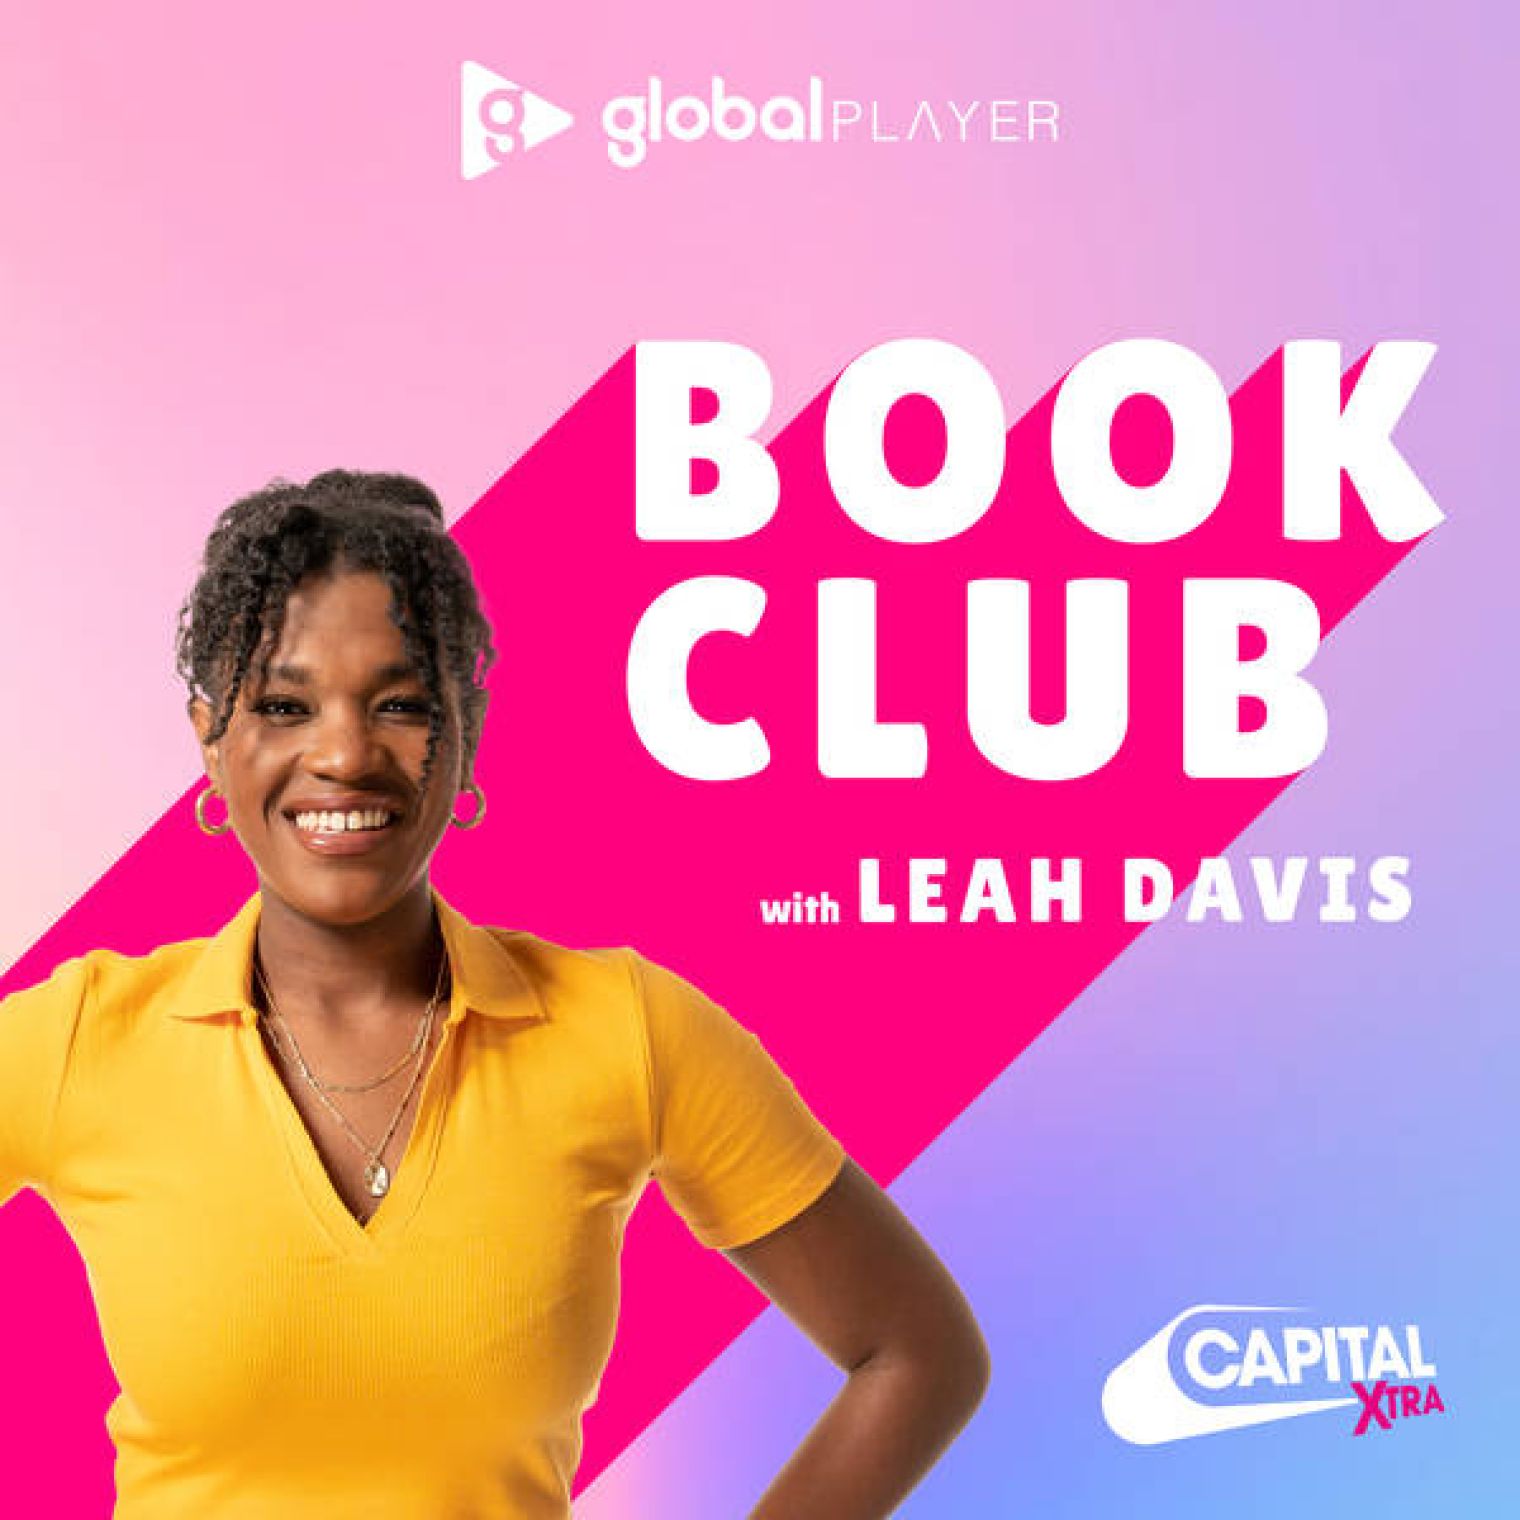 Leah Davis hosts the Capital Xtra Book Club - now also available as a brand new podcast